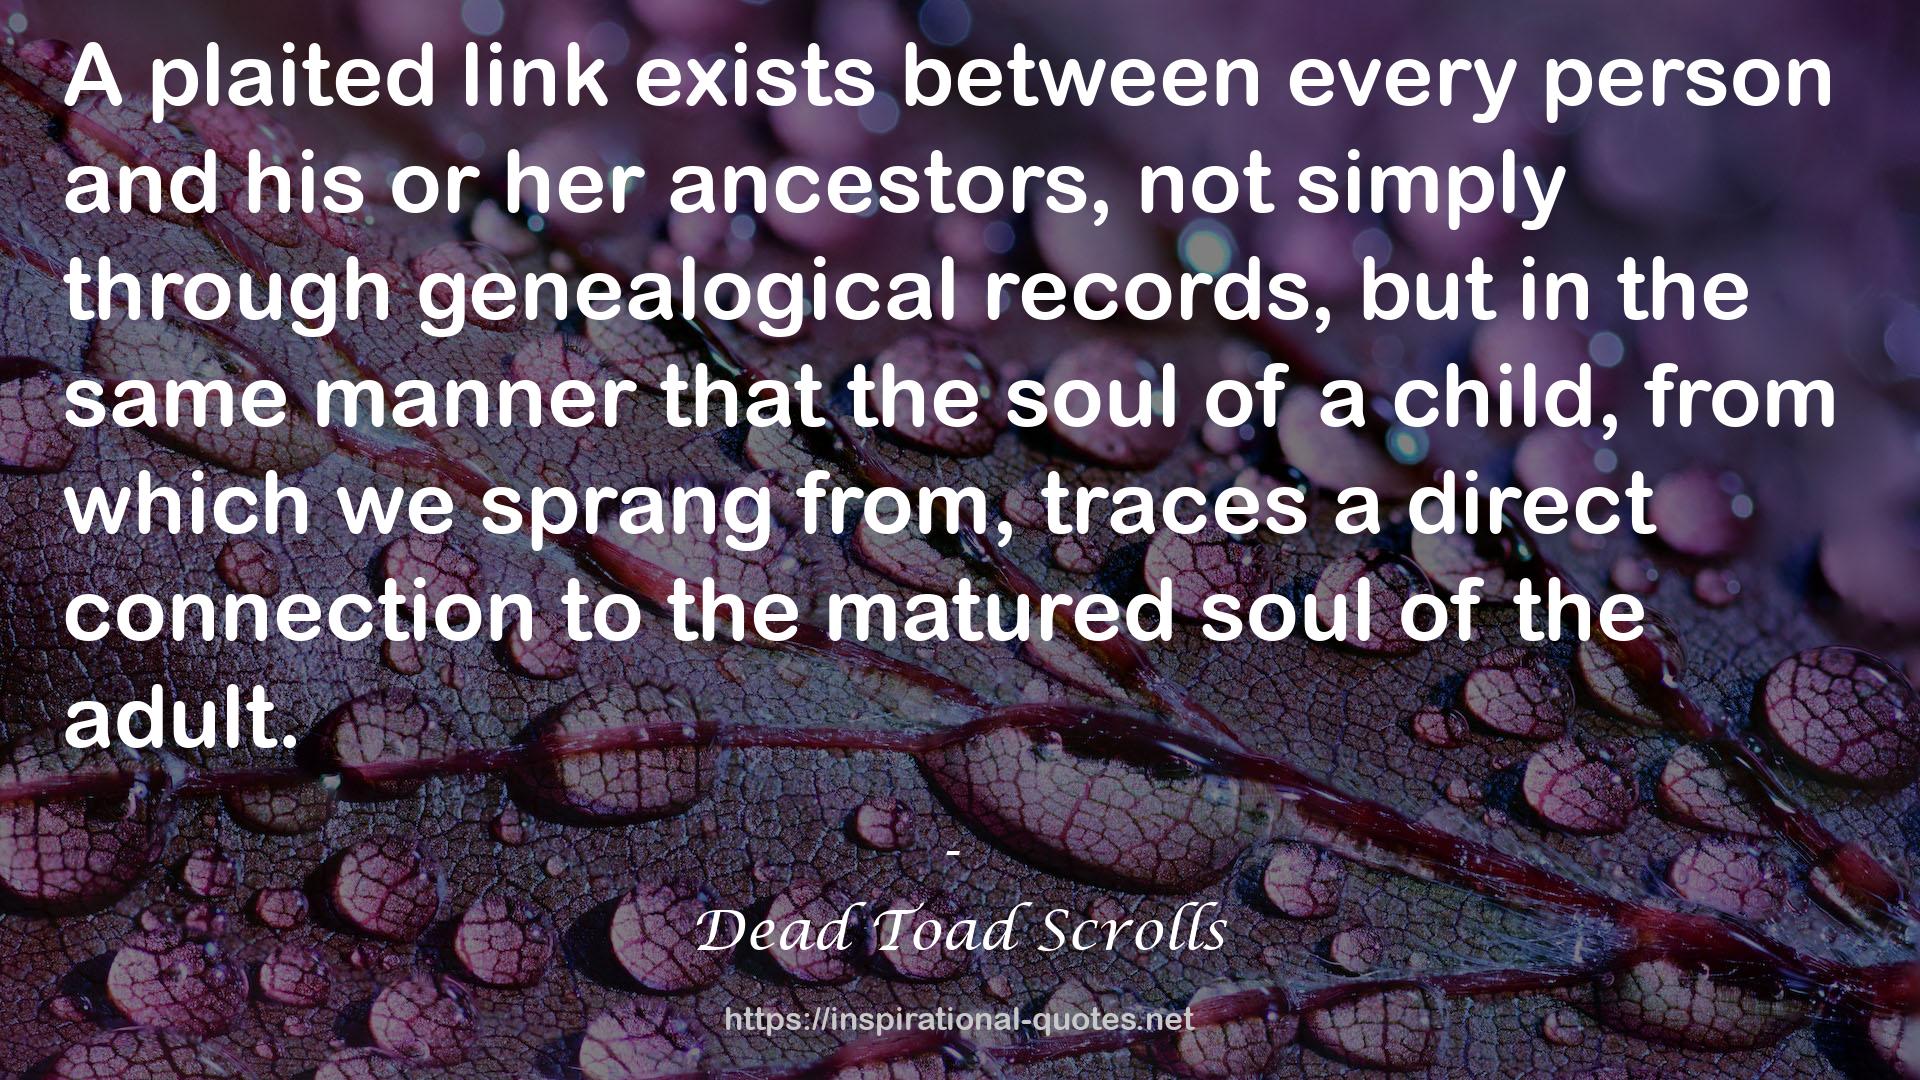 genealogical  QUOTES